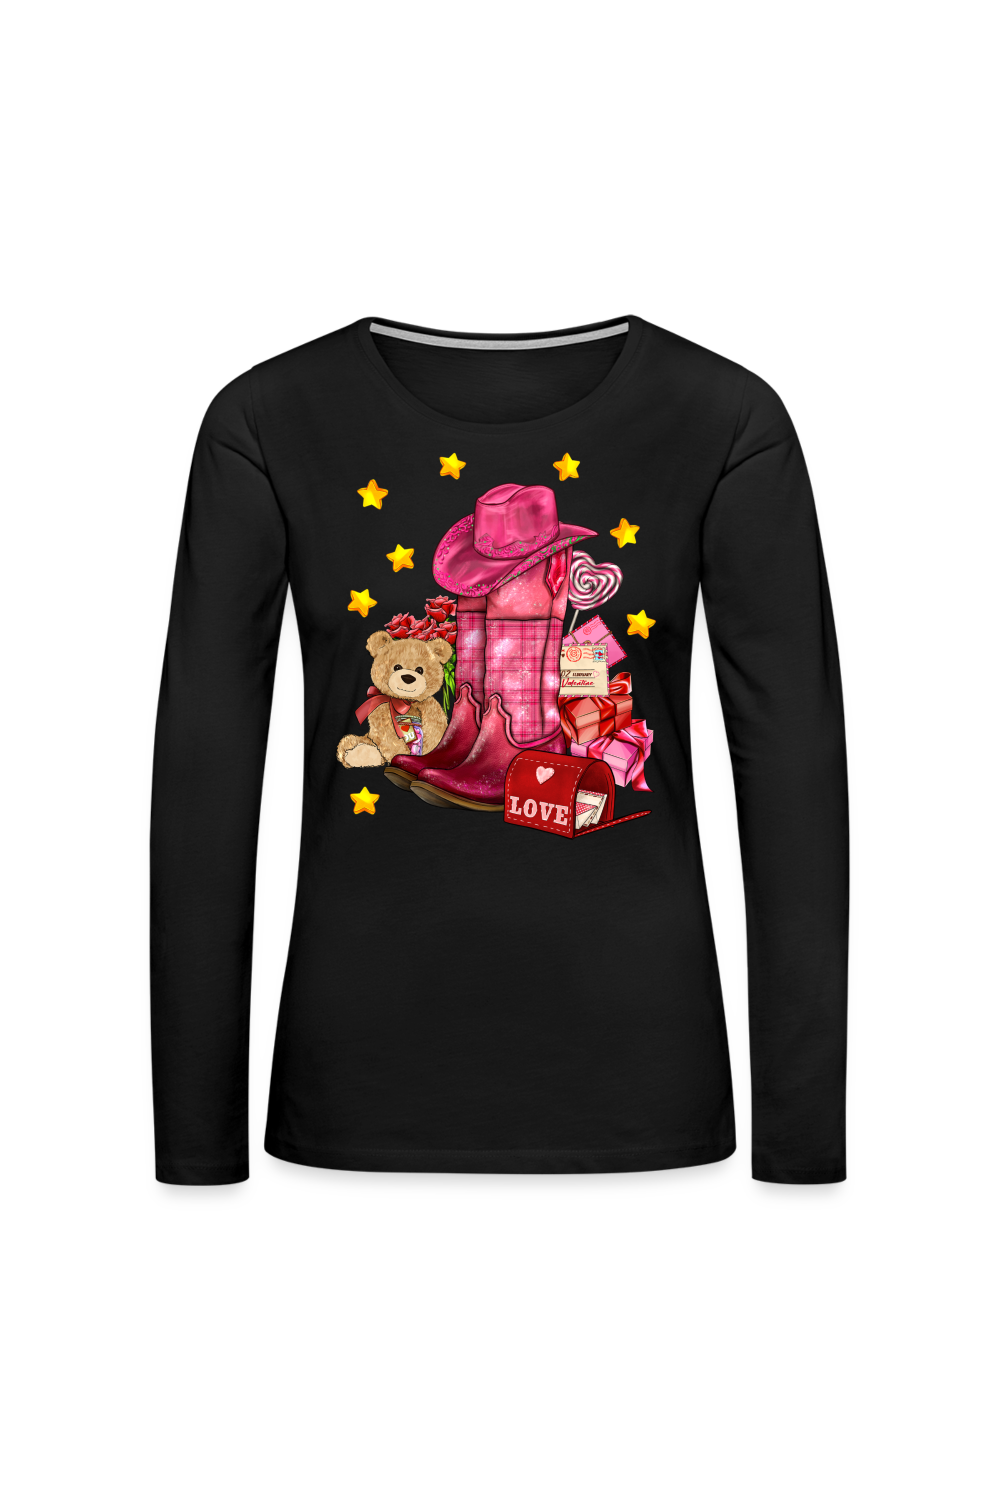 Women's Valentine's Day Cow Girl Hat and Boots Long Sleeve T-Shirt - black